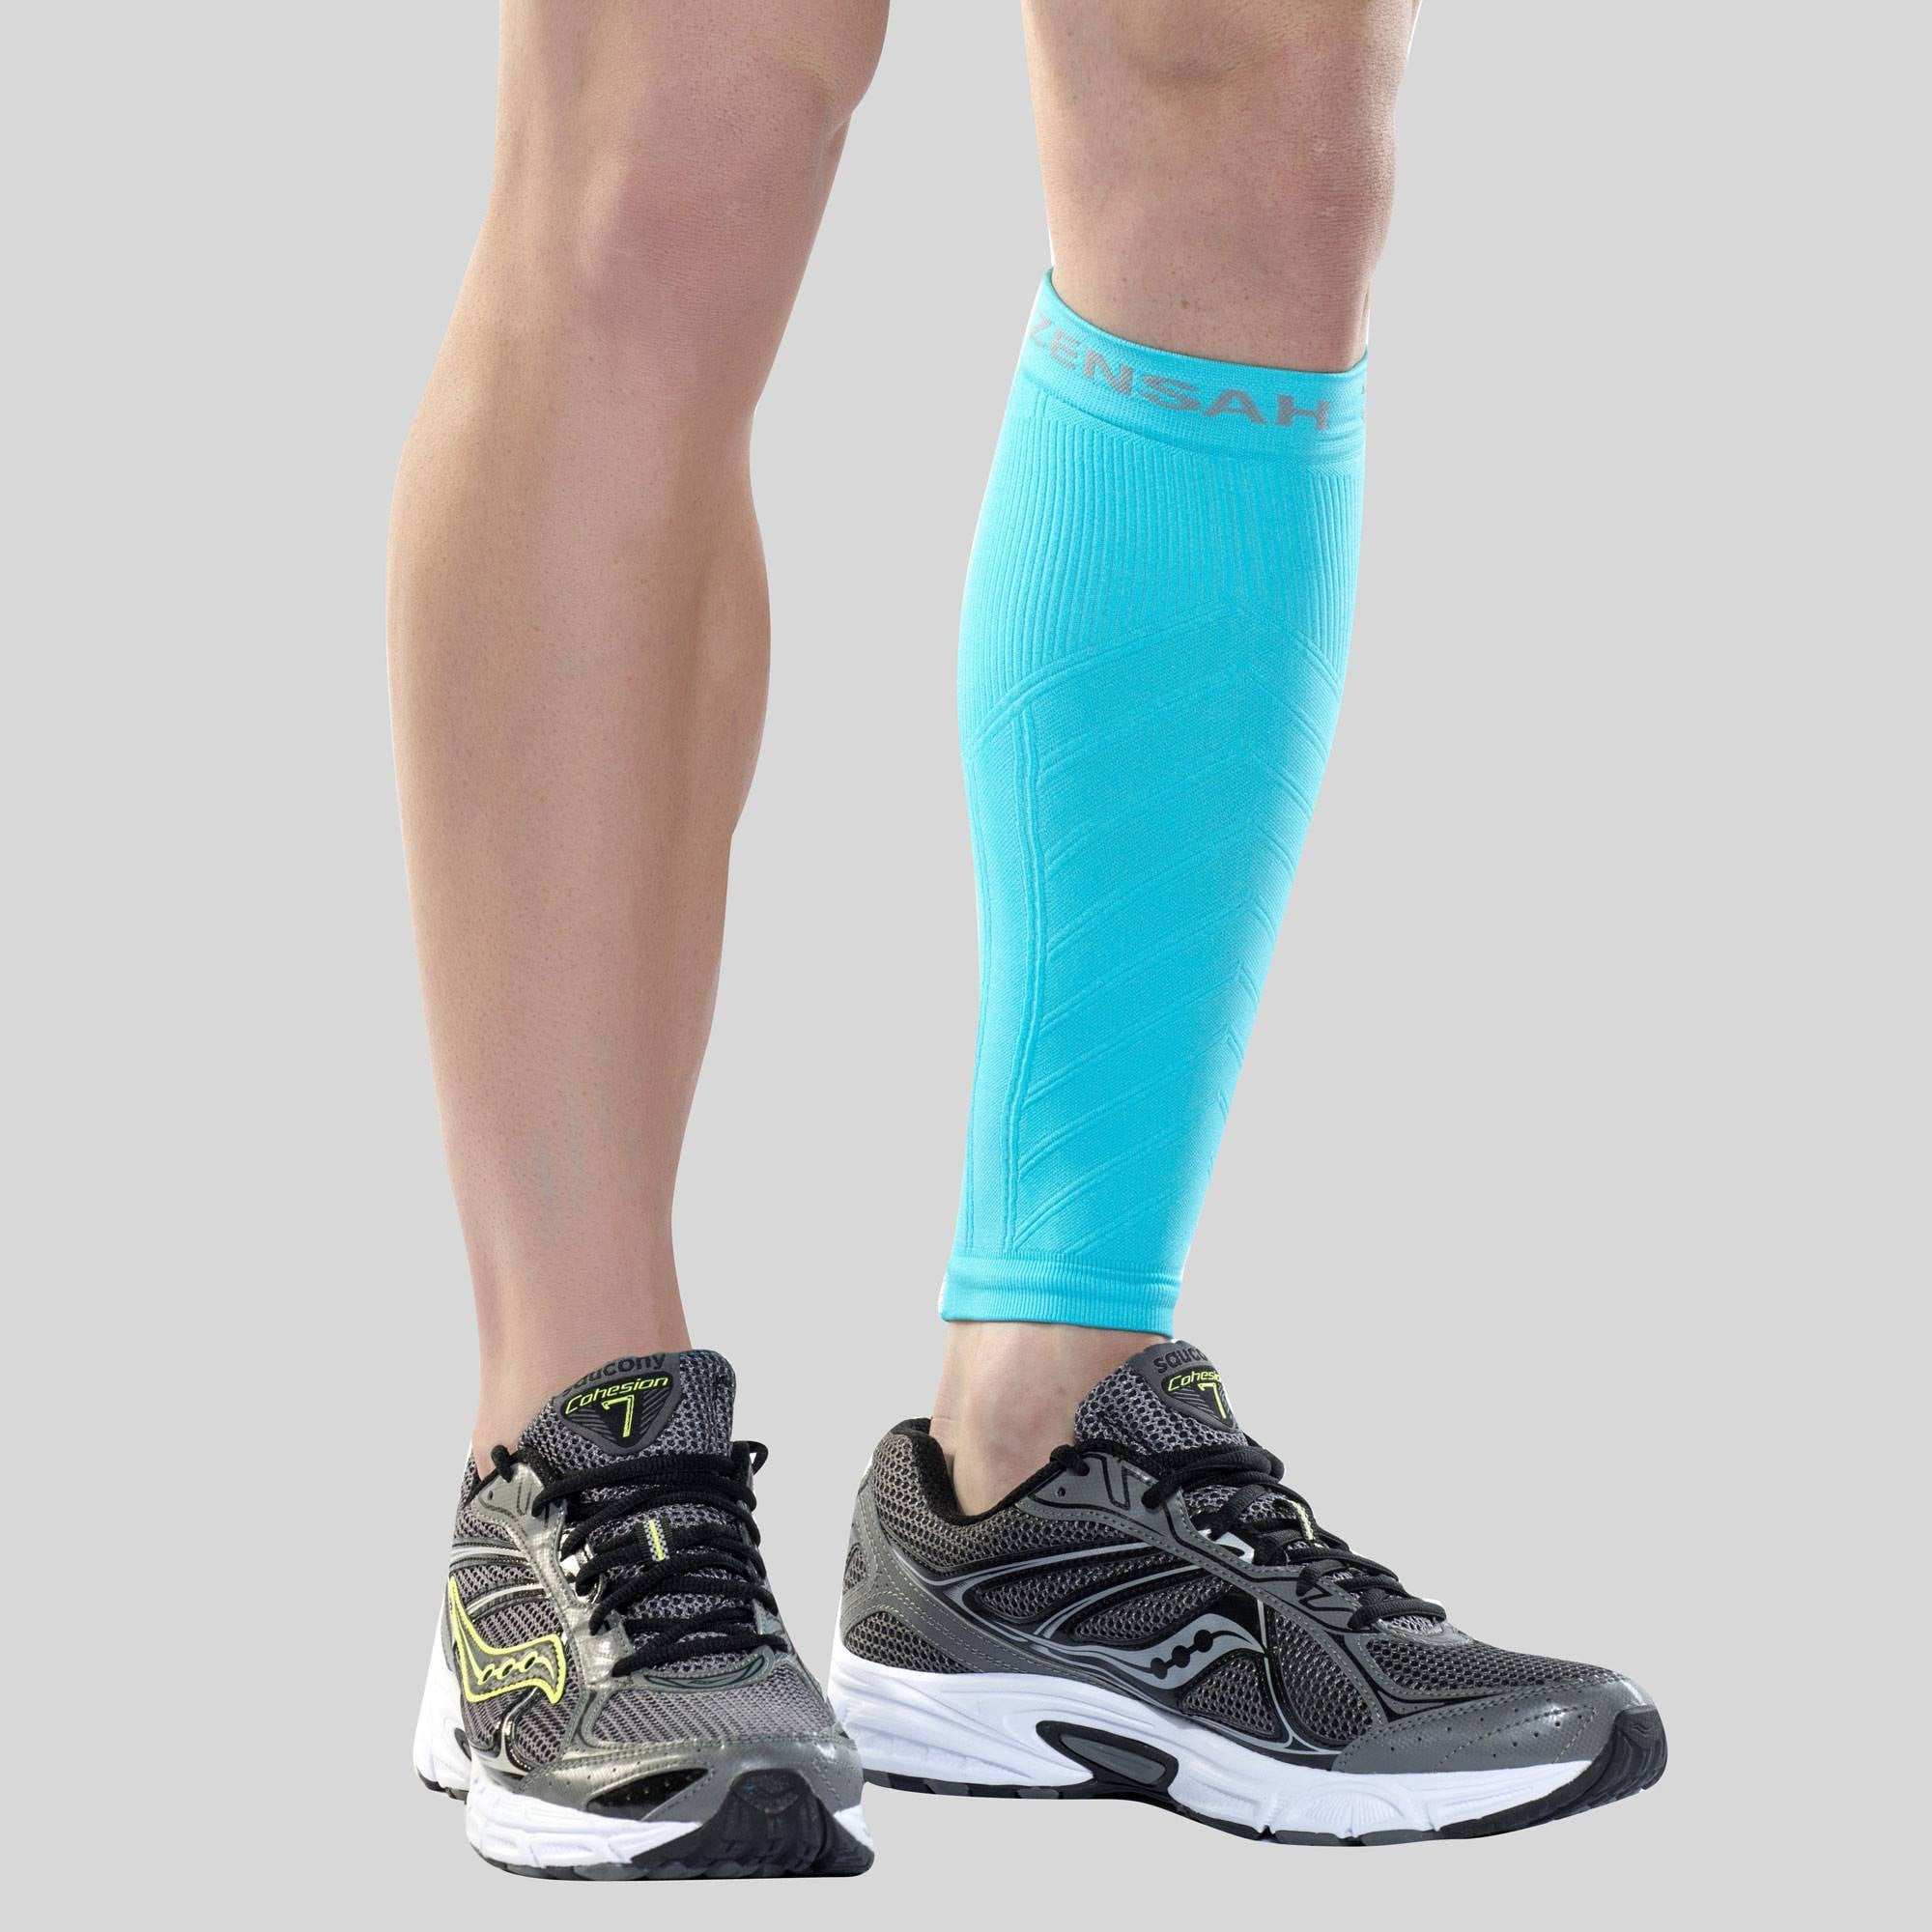 QUADA Compression Sleeve for Men & Women - BEST Calf Compression Socks for  Running Shin Splint Calf Pain Relief Leg Support Sleeve for Runners Medical